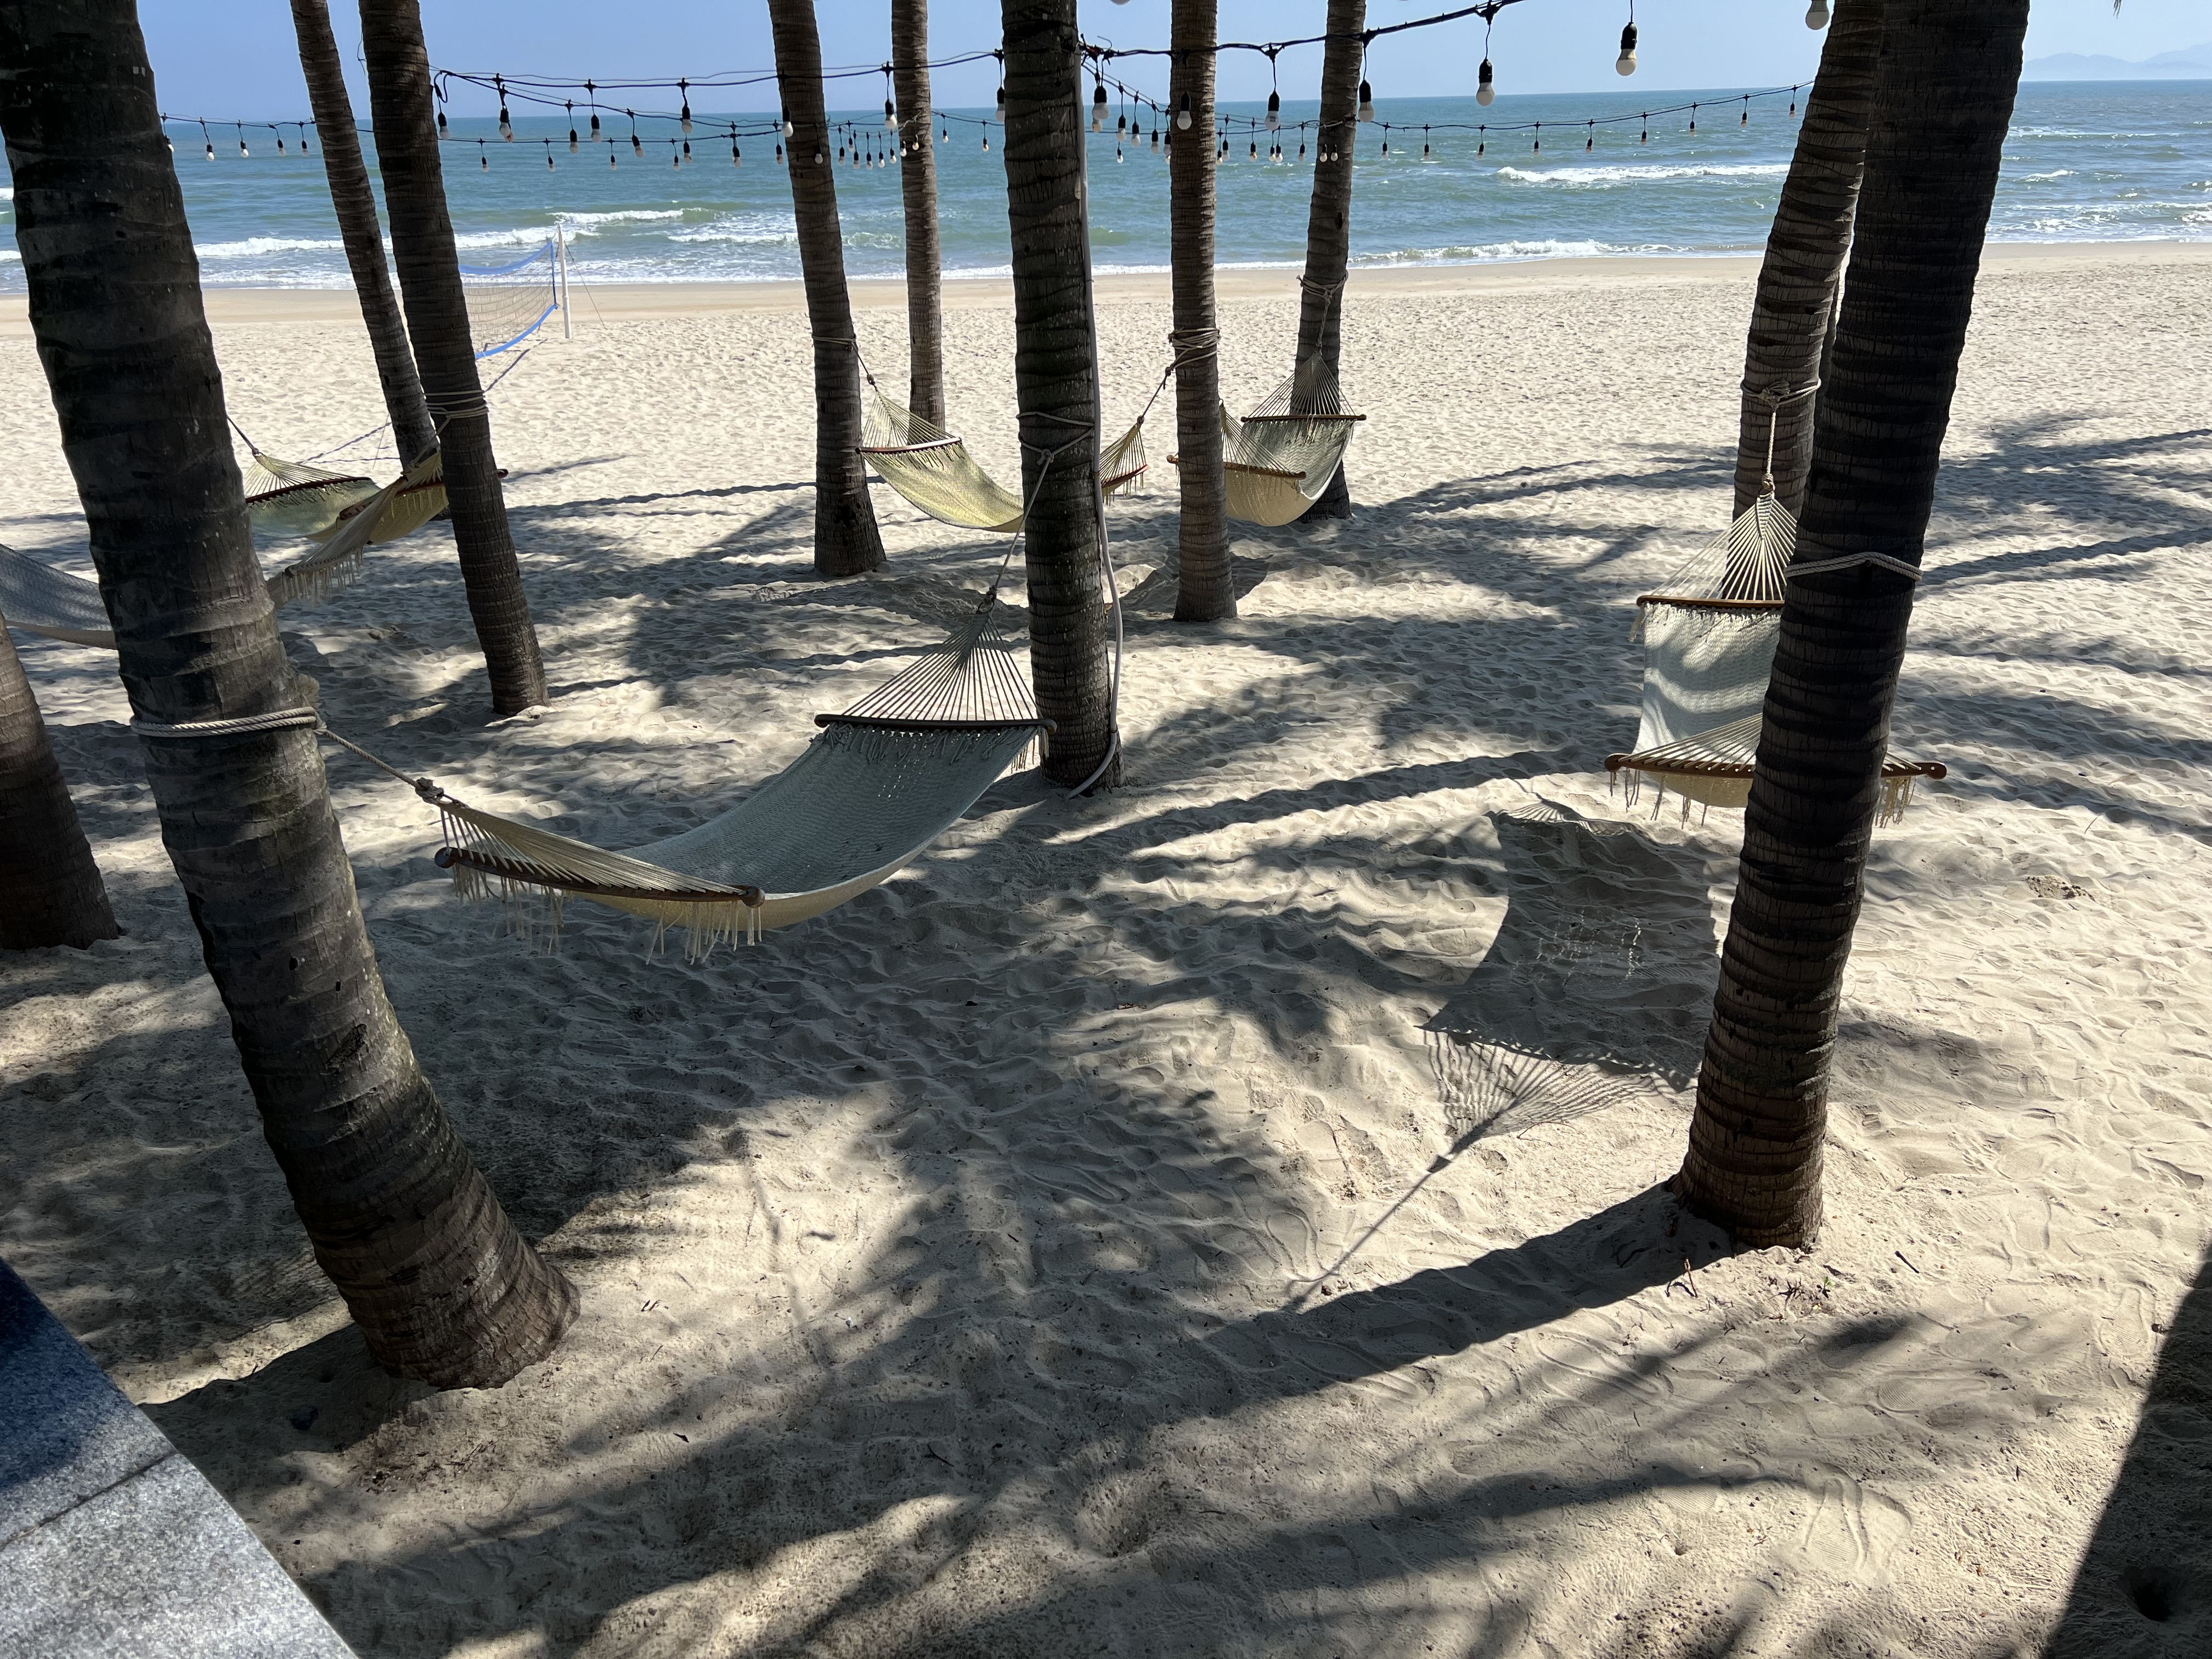 hammocks on a beach with palm trees and a body of water in the background